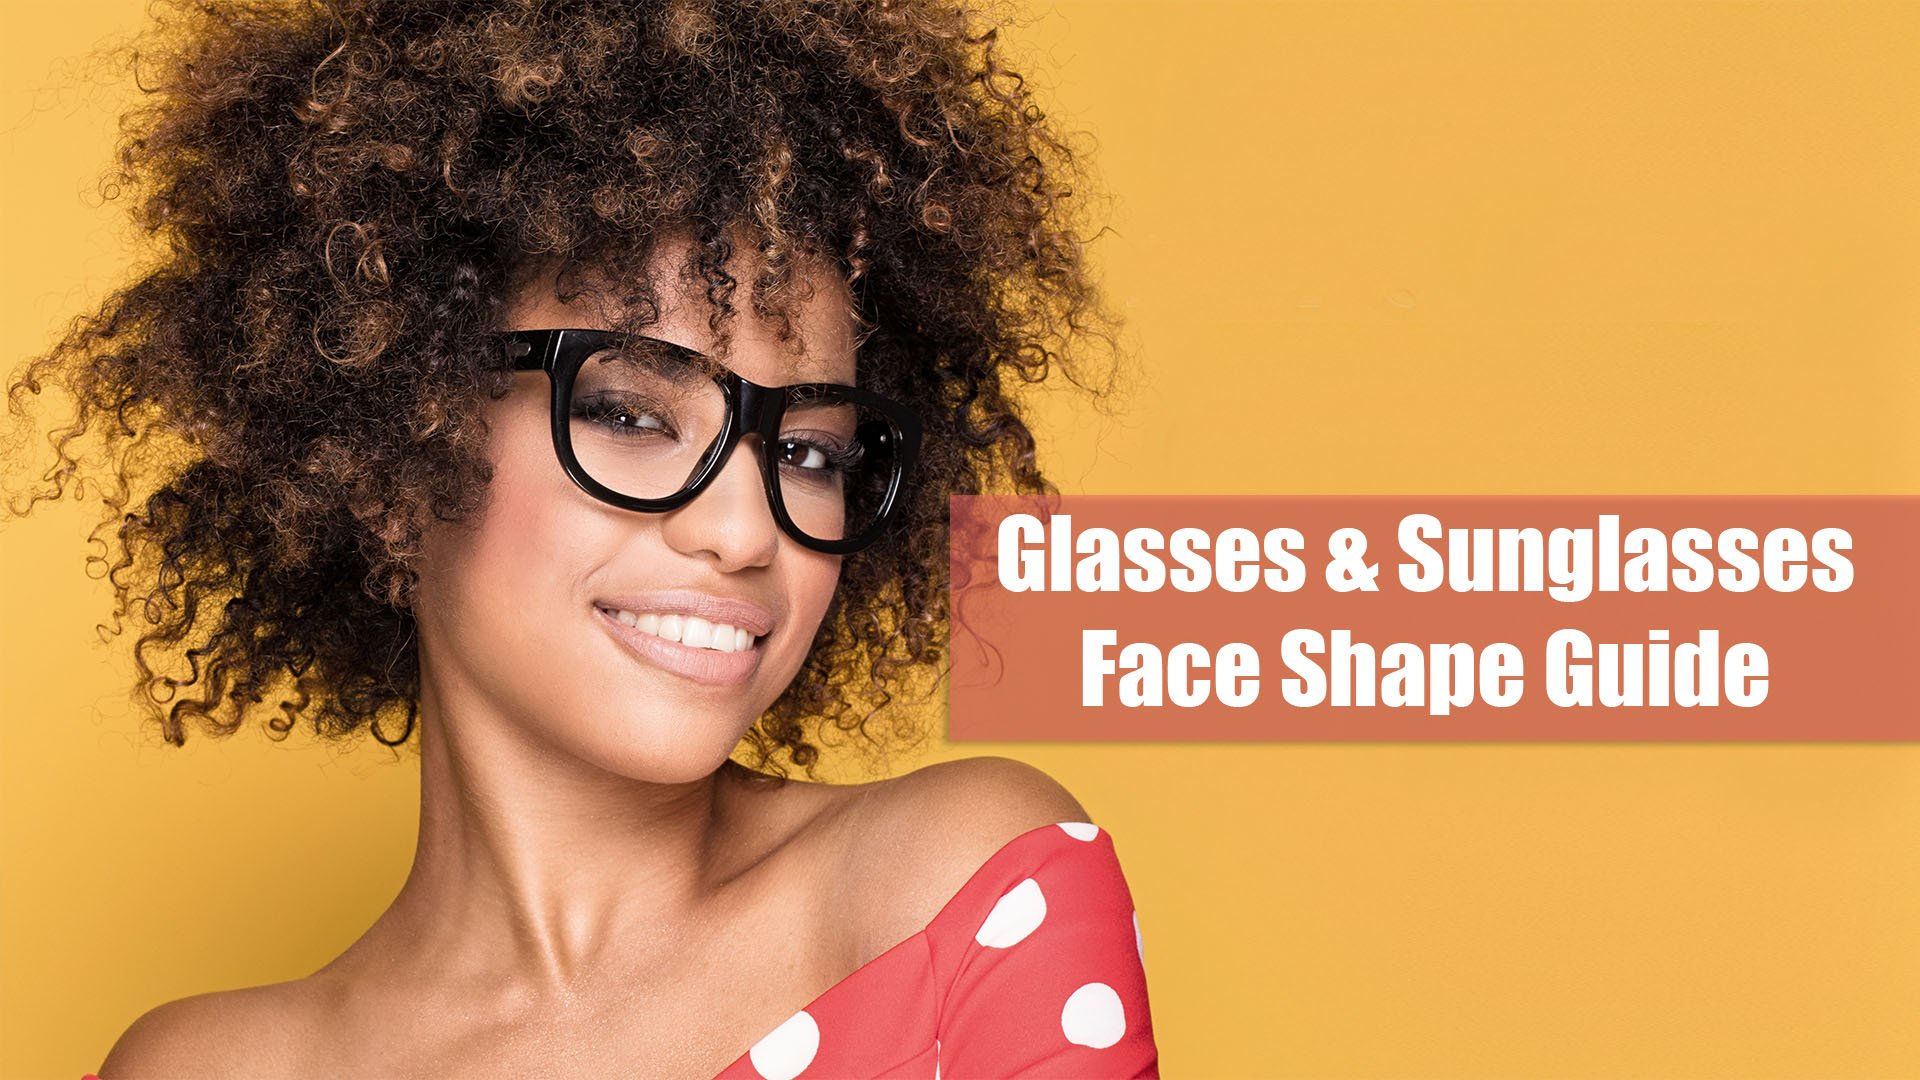 How to Determine Face Shape for Glasses